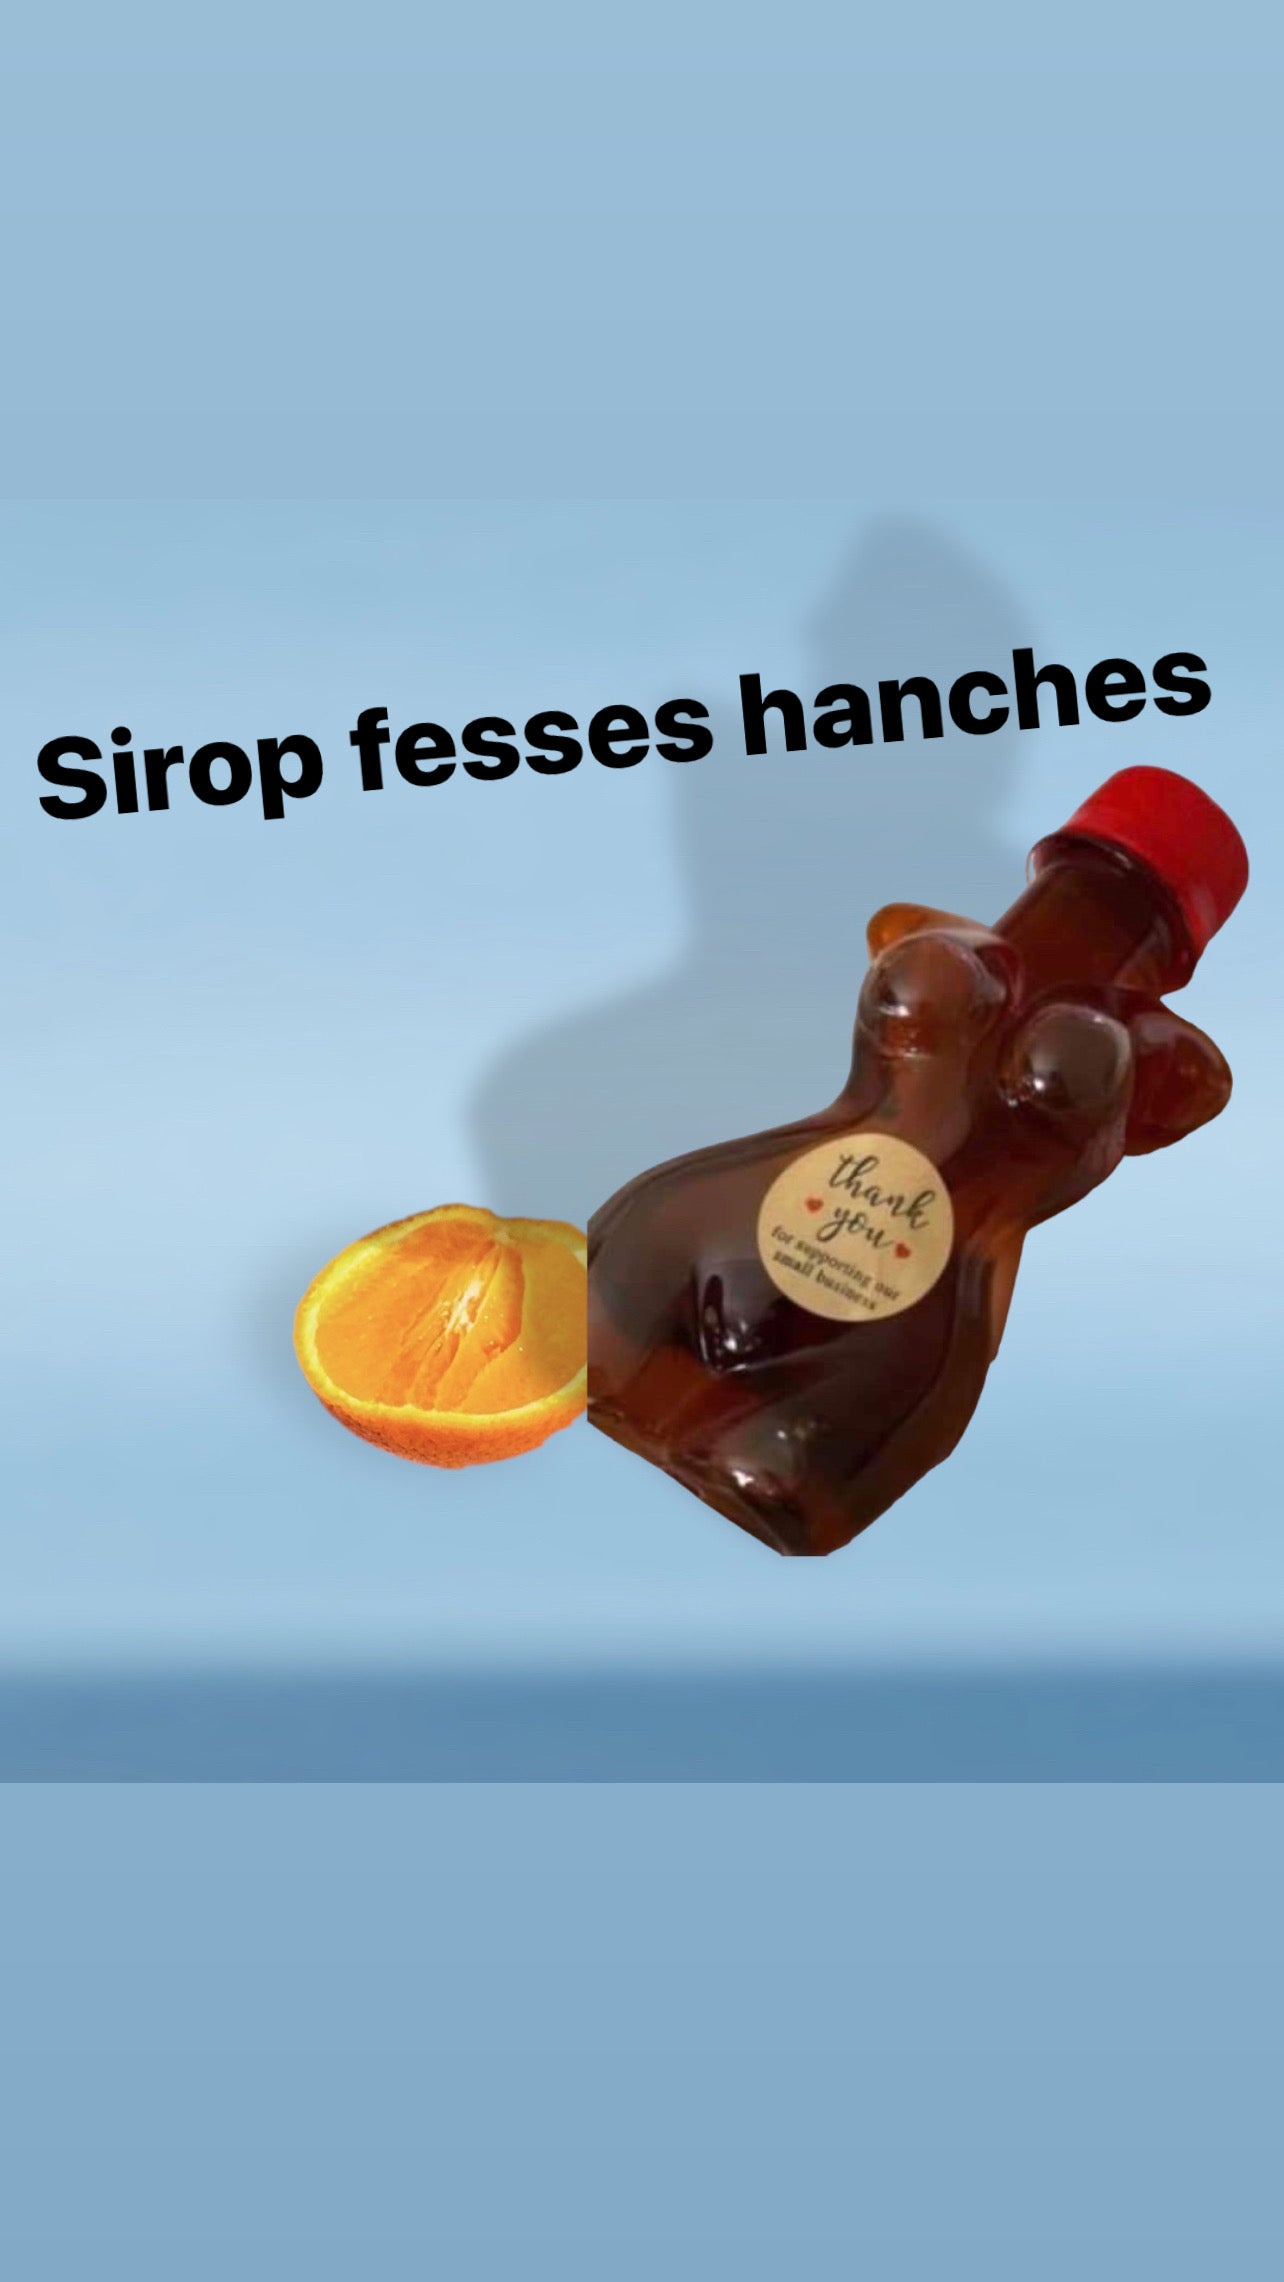 Sirop fesses hanches